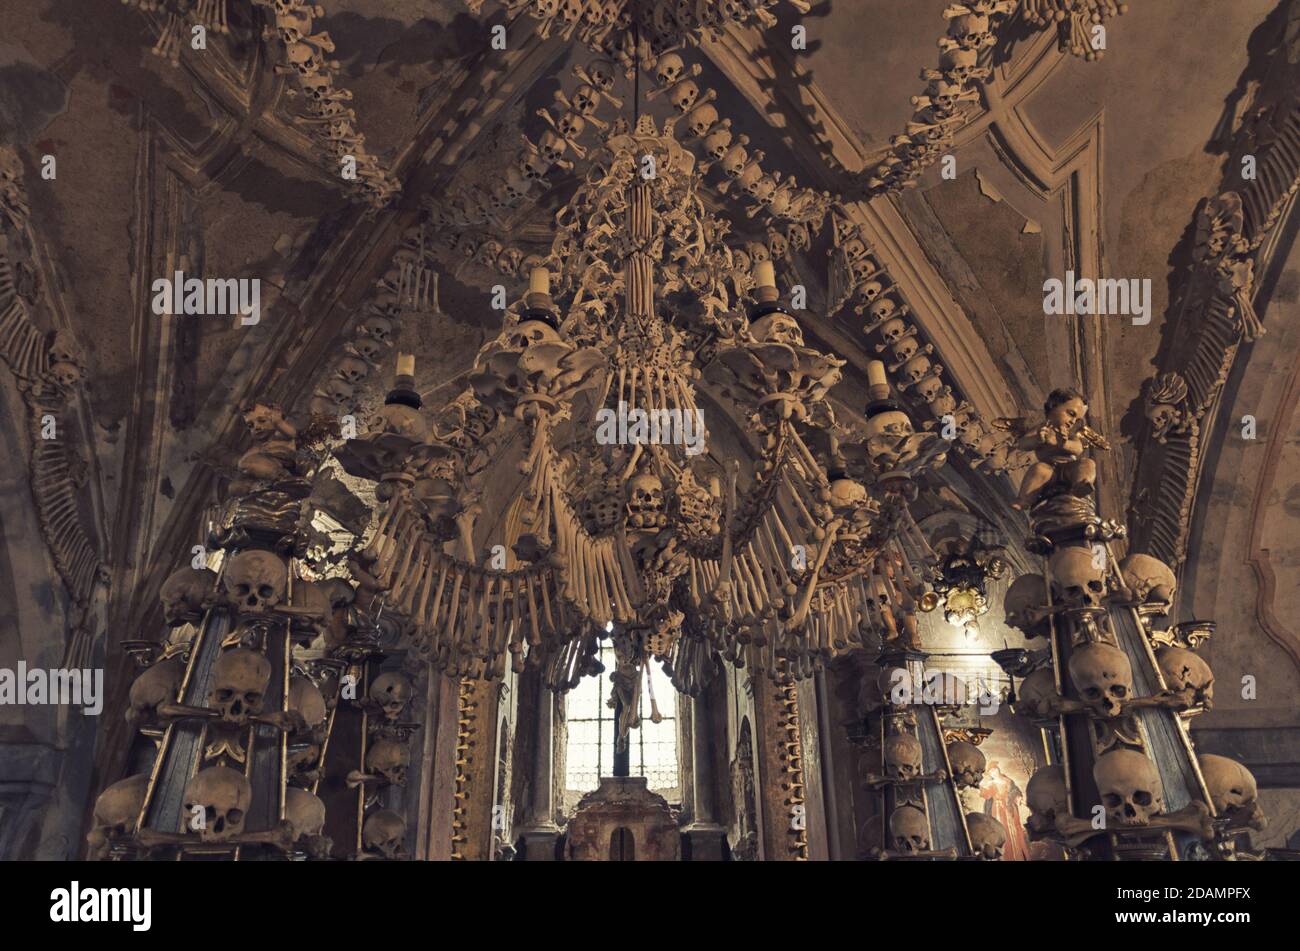 Kutna Hora, Czech Republic, May 14, 2019: Room with colonnade of human  bones and skulls. Bony lustre hang rom ceiling. Altar with crucifixion of  Jesus Christ in Kostnice Church in Kutna Hora